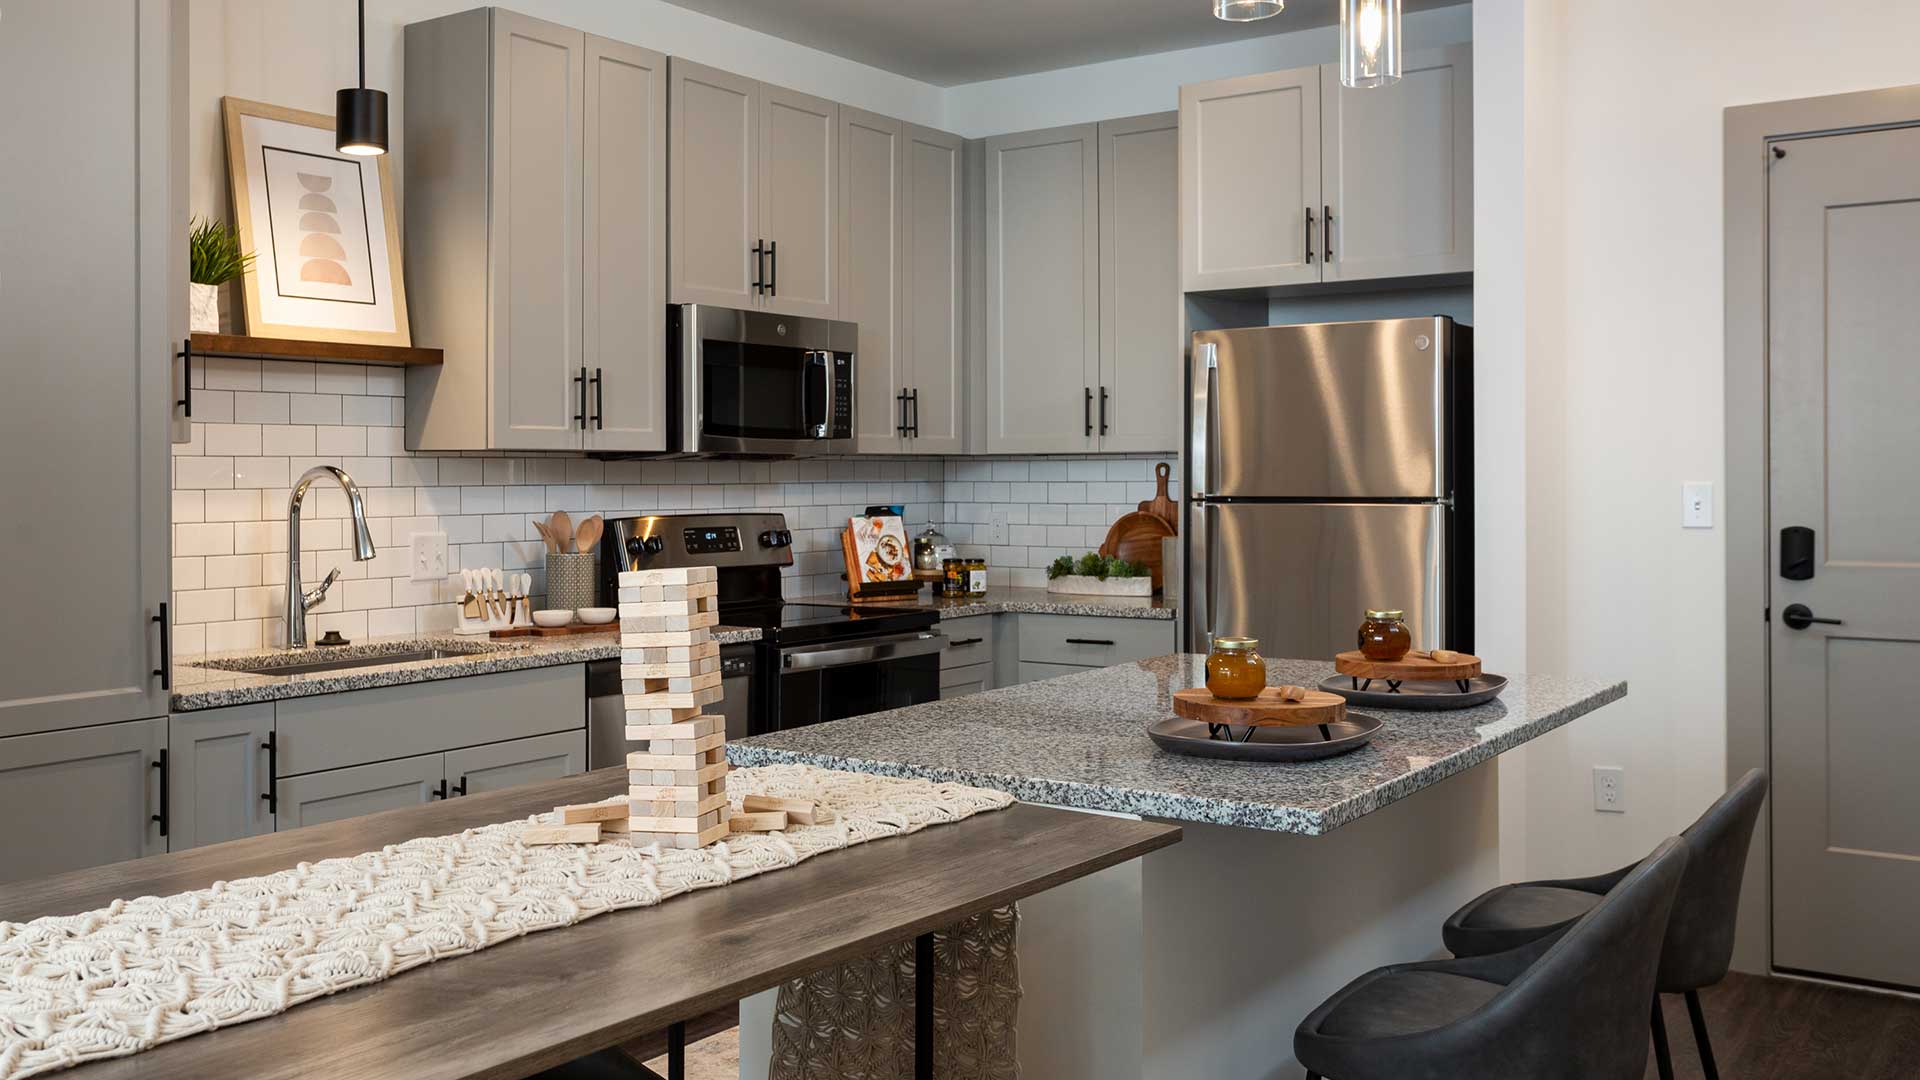 Looking into a kitchen from across the island countertop. There is a table with a block game in front. The kitchen has modern, grey cabinets and stainless steel appliances.